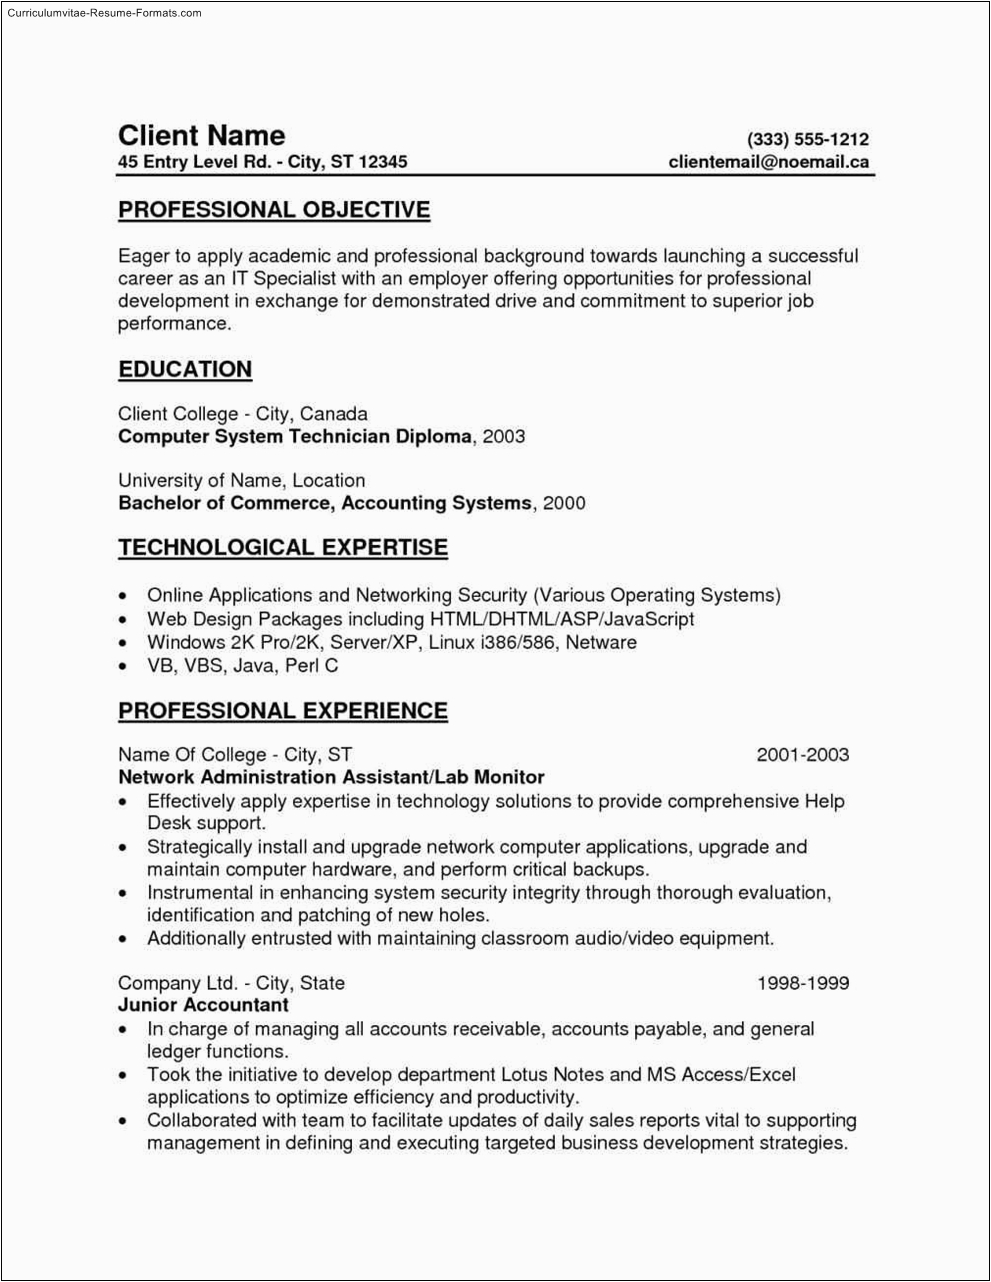 Free Resume Templates for Entry Level Jobs Entry Level Job Resume Templates